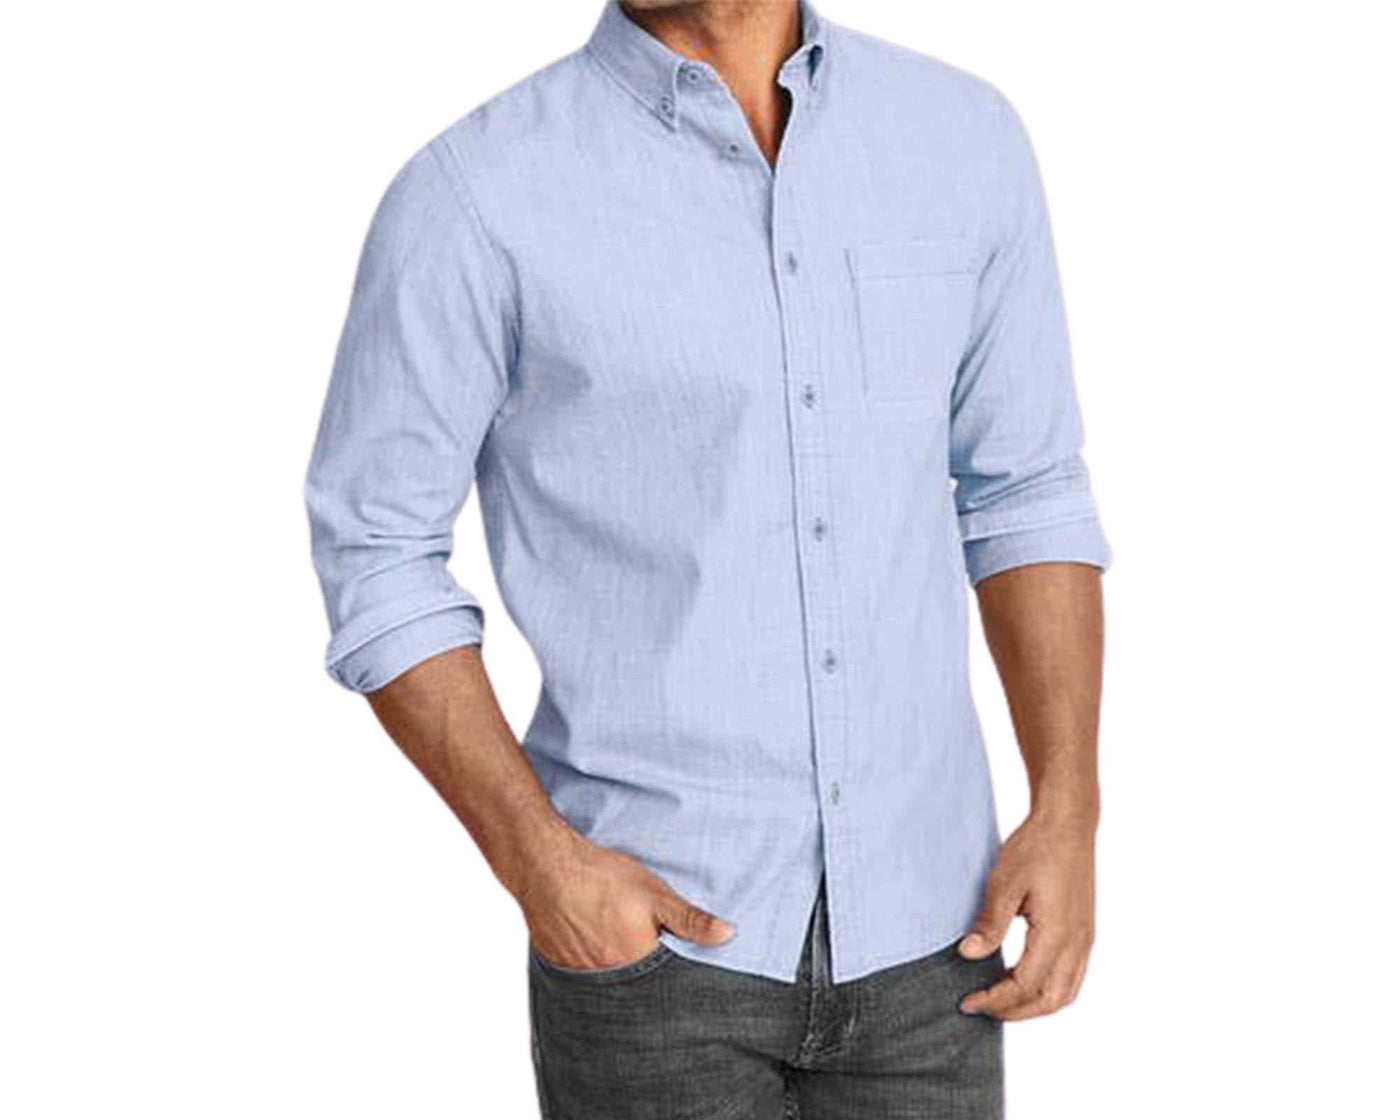 man wearing chambray classic dress shirt with plastic buttons